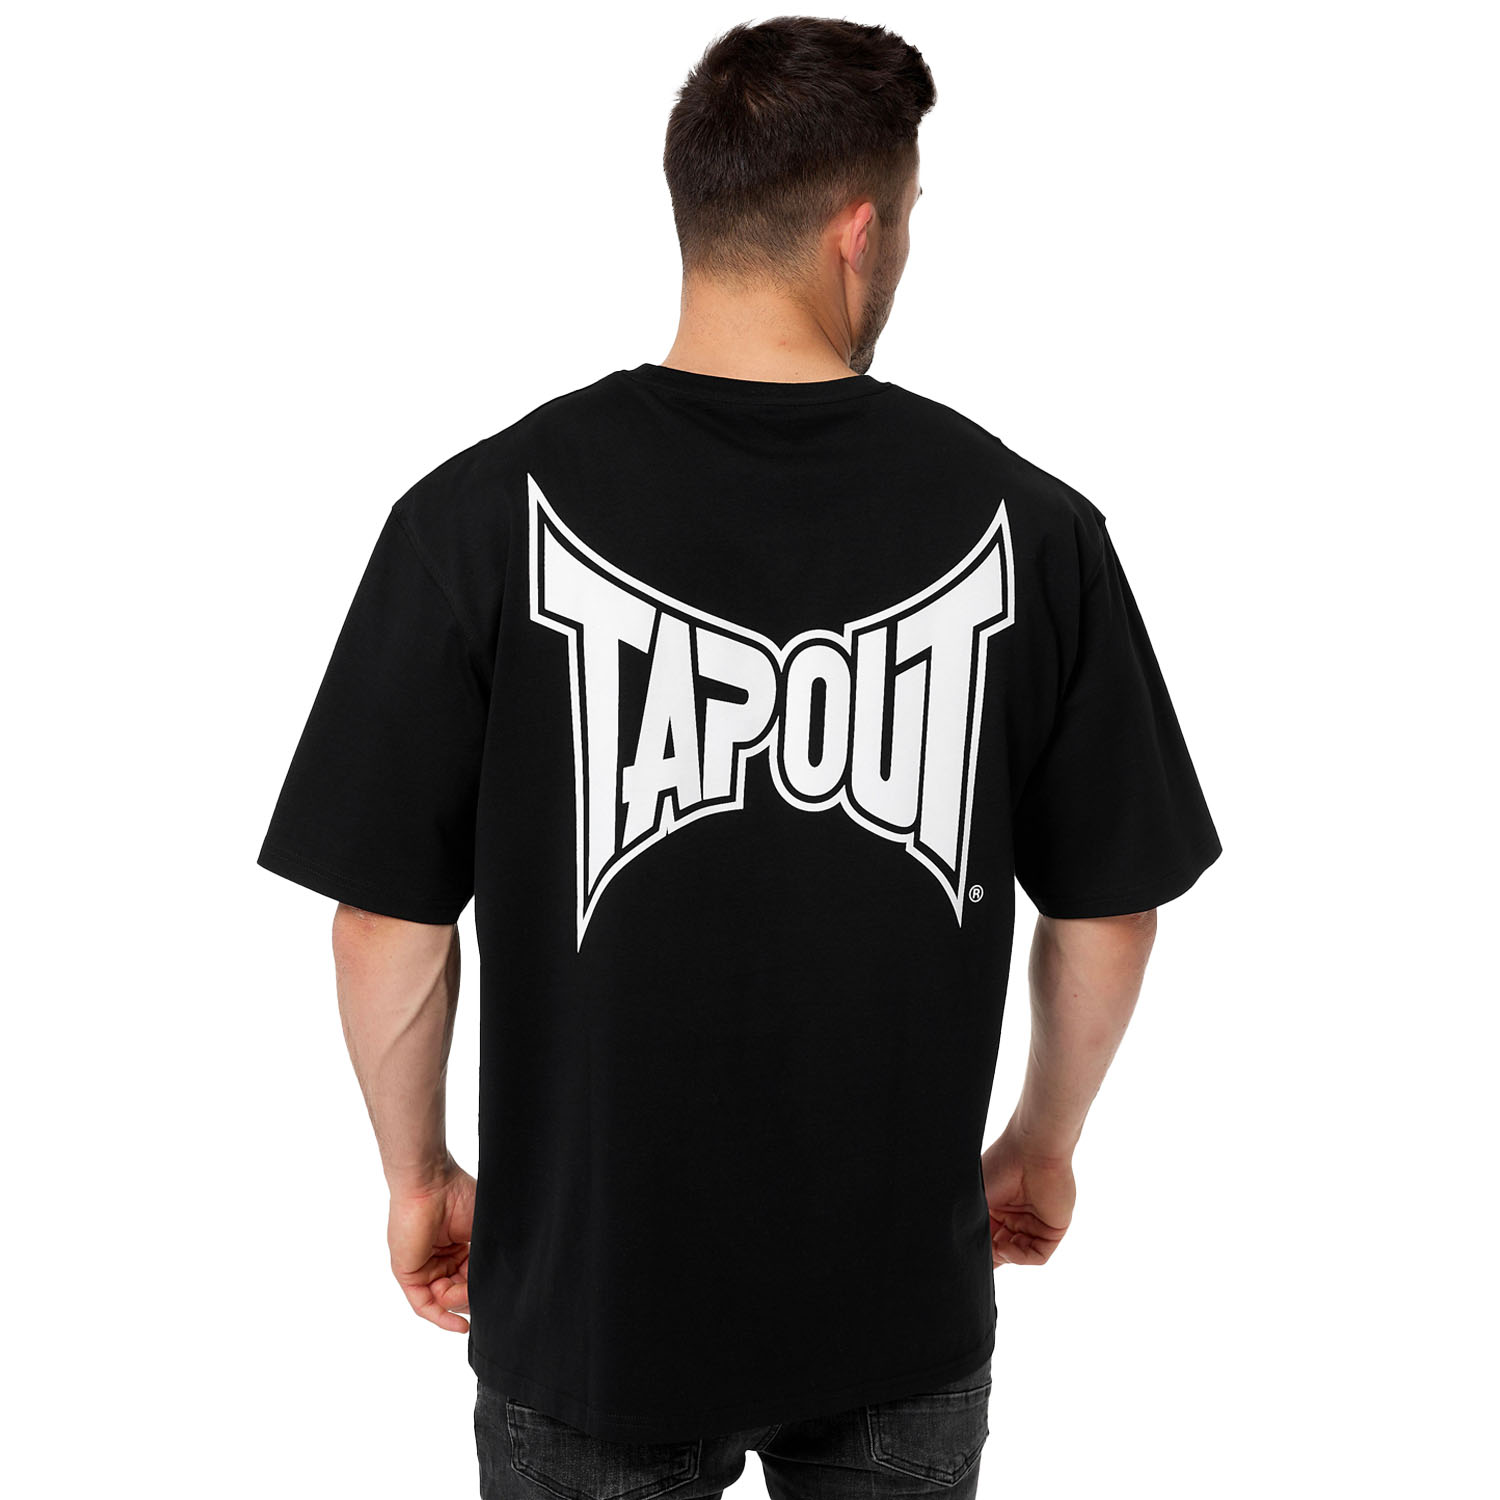 Tapout T-Shirt, Creekside, black-white, S